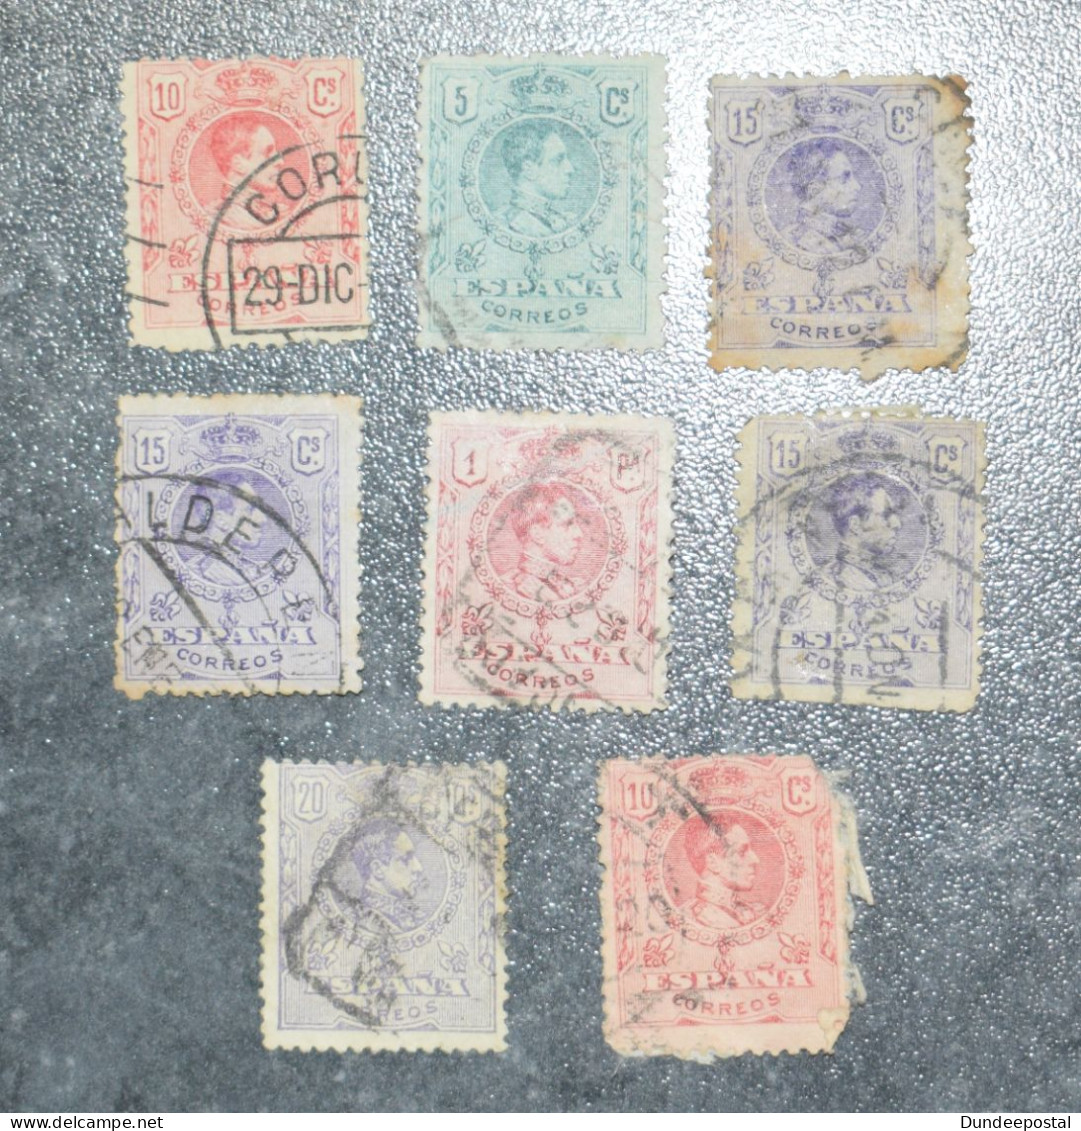 SPAIN  STAMPS  Alfonso Control Numbers  1909  ~~L@@K~~ - Usati